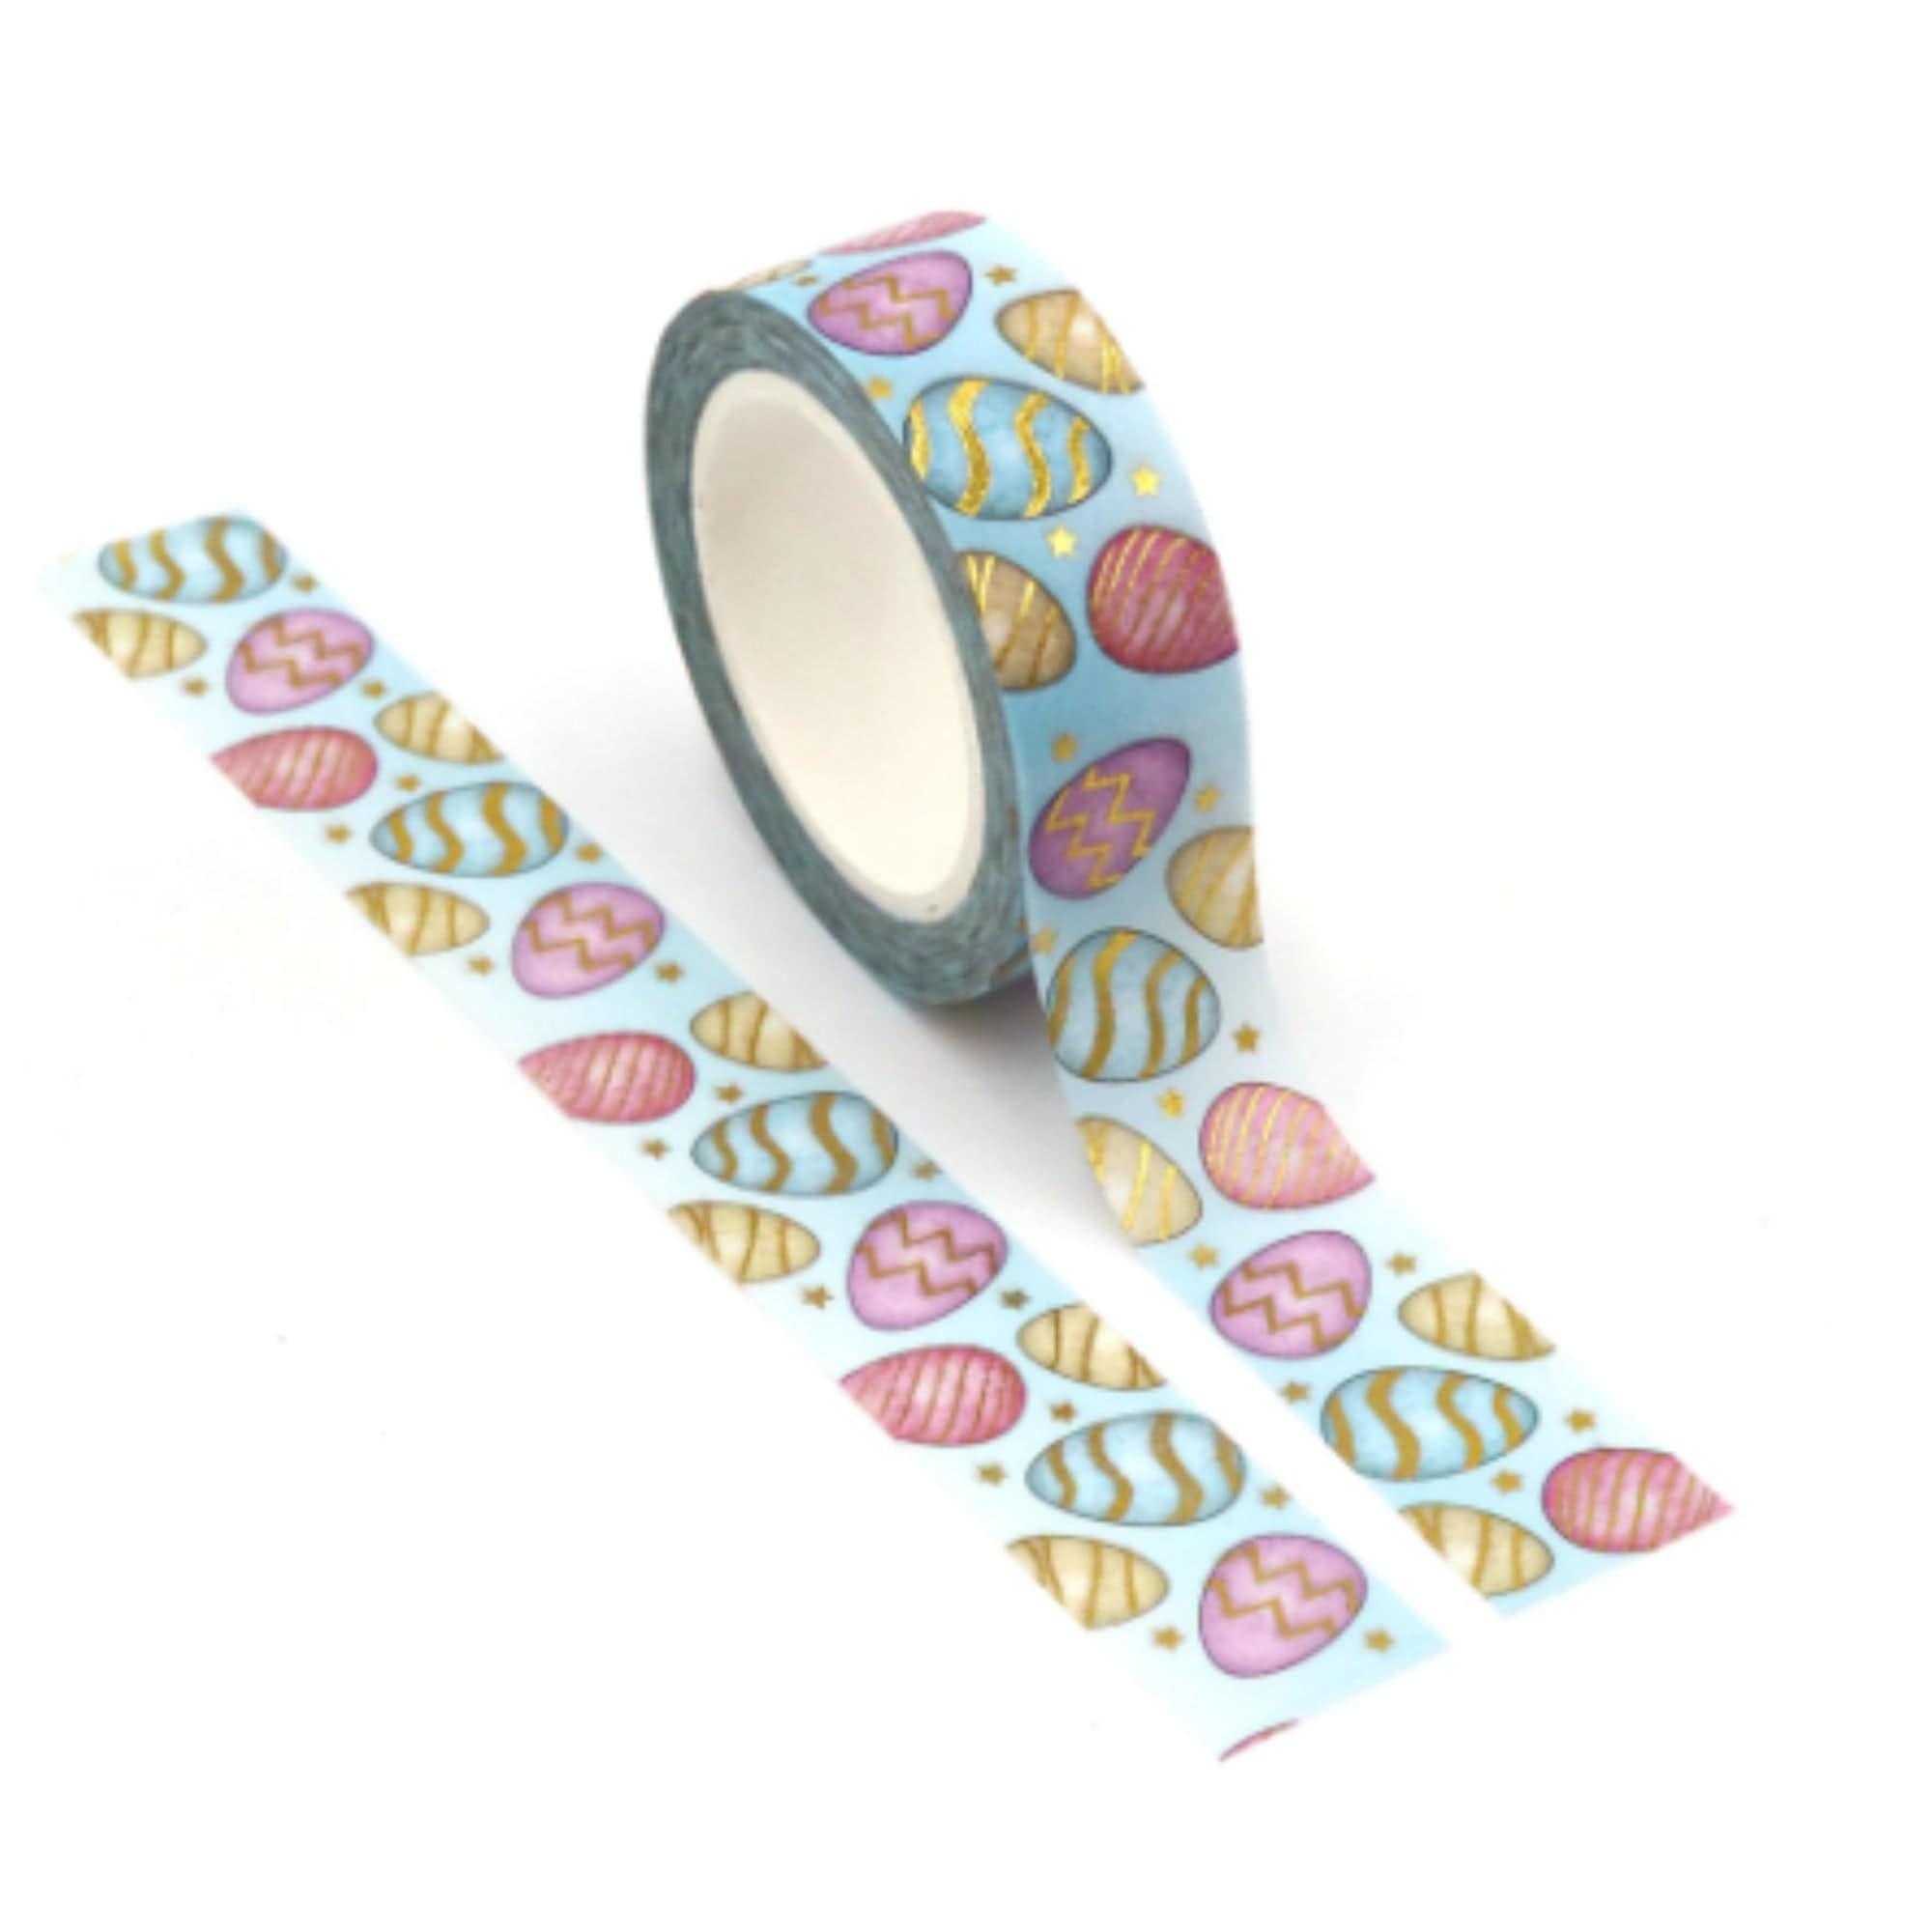 TW Collection Easter Eggs Gold Foiled Scrapbook Washi Tape by SSC Designs - 15mm x 30 Feet